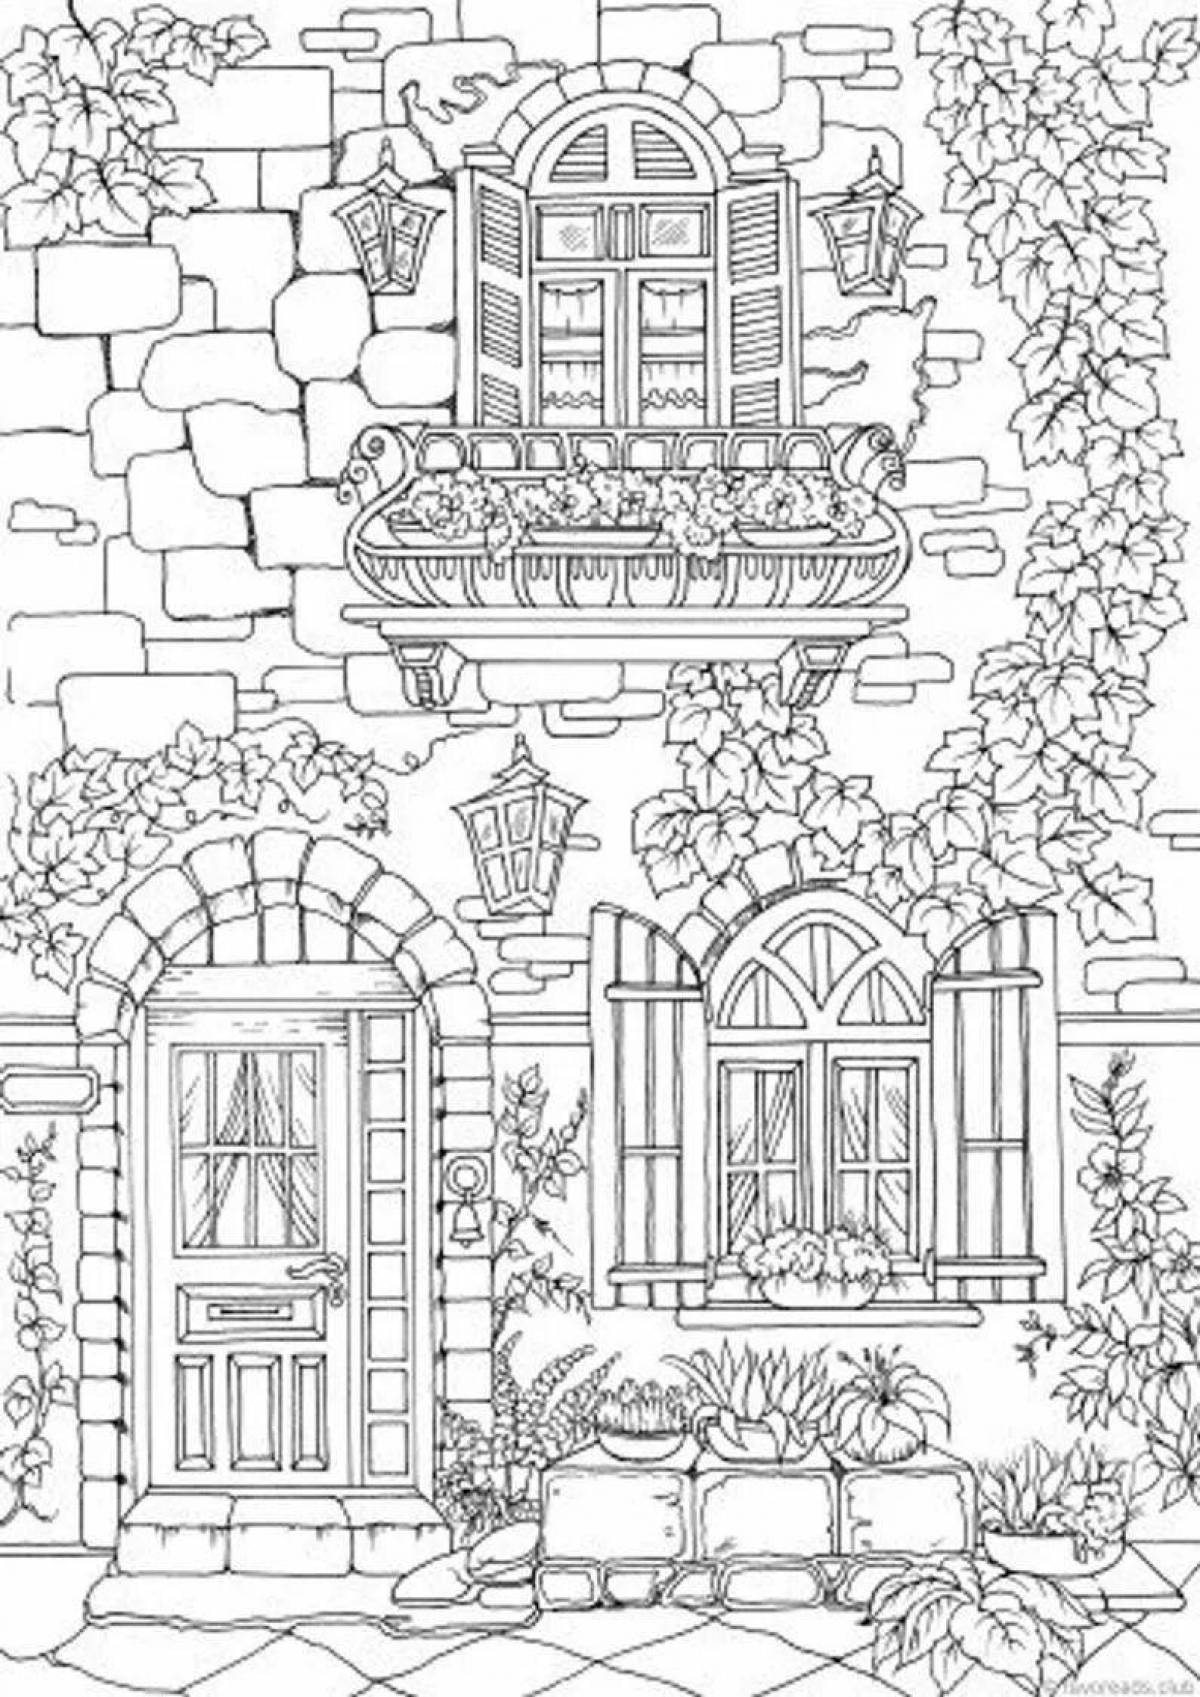 Coloring page blissful anti-stress houses